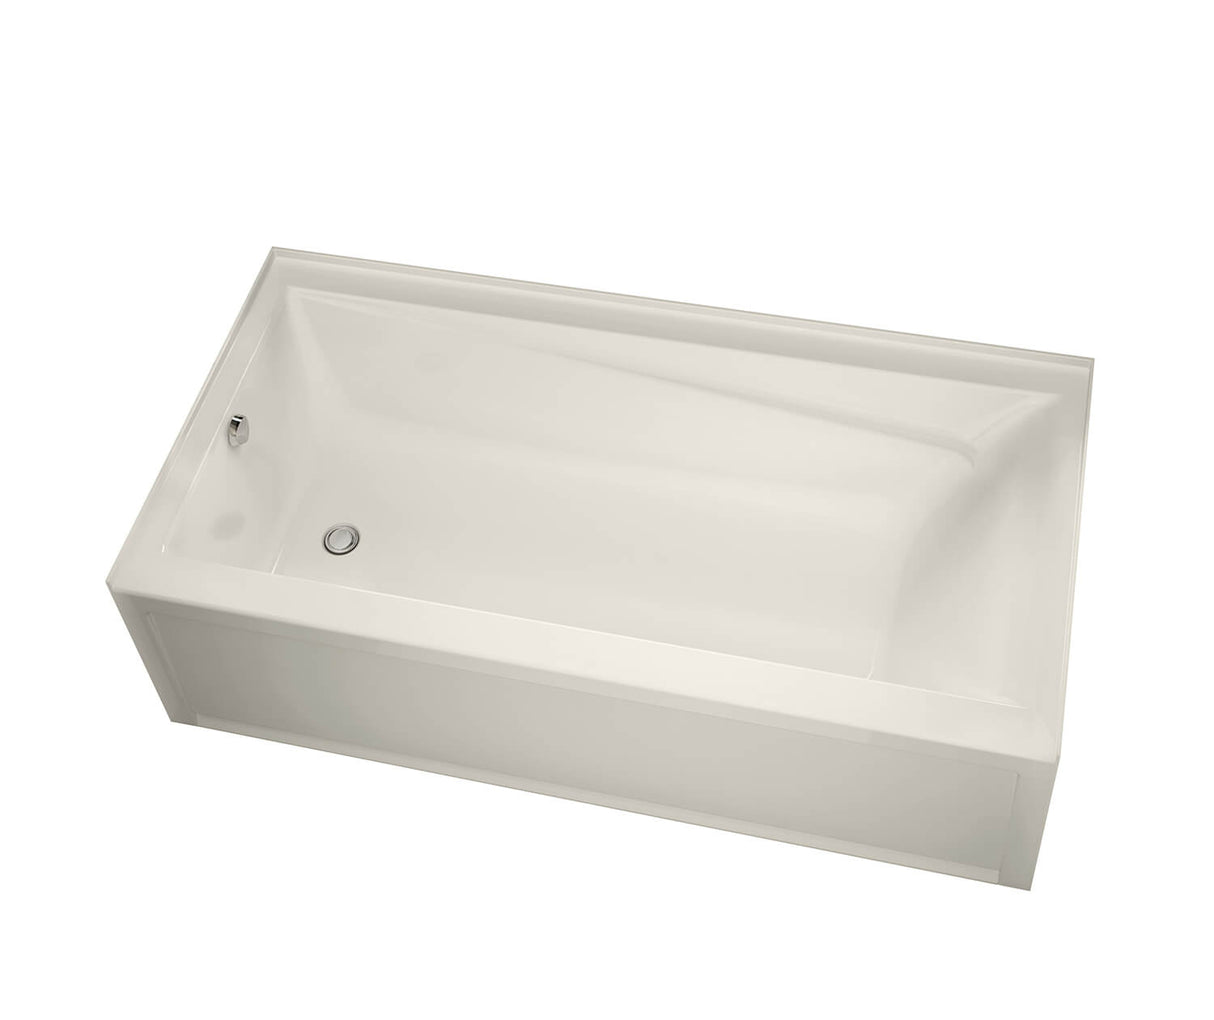 MAAX 105454-000-007-002 New Town 6030 IFS Acrylic Alcove Right-Hand Drain Bathtub in Biscuit